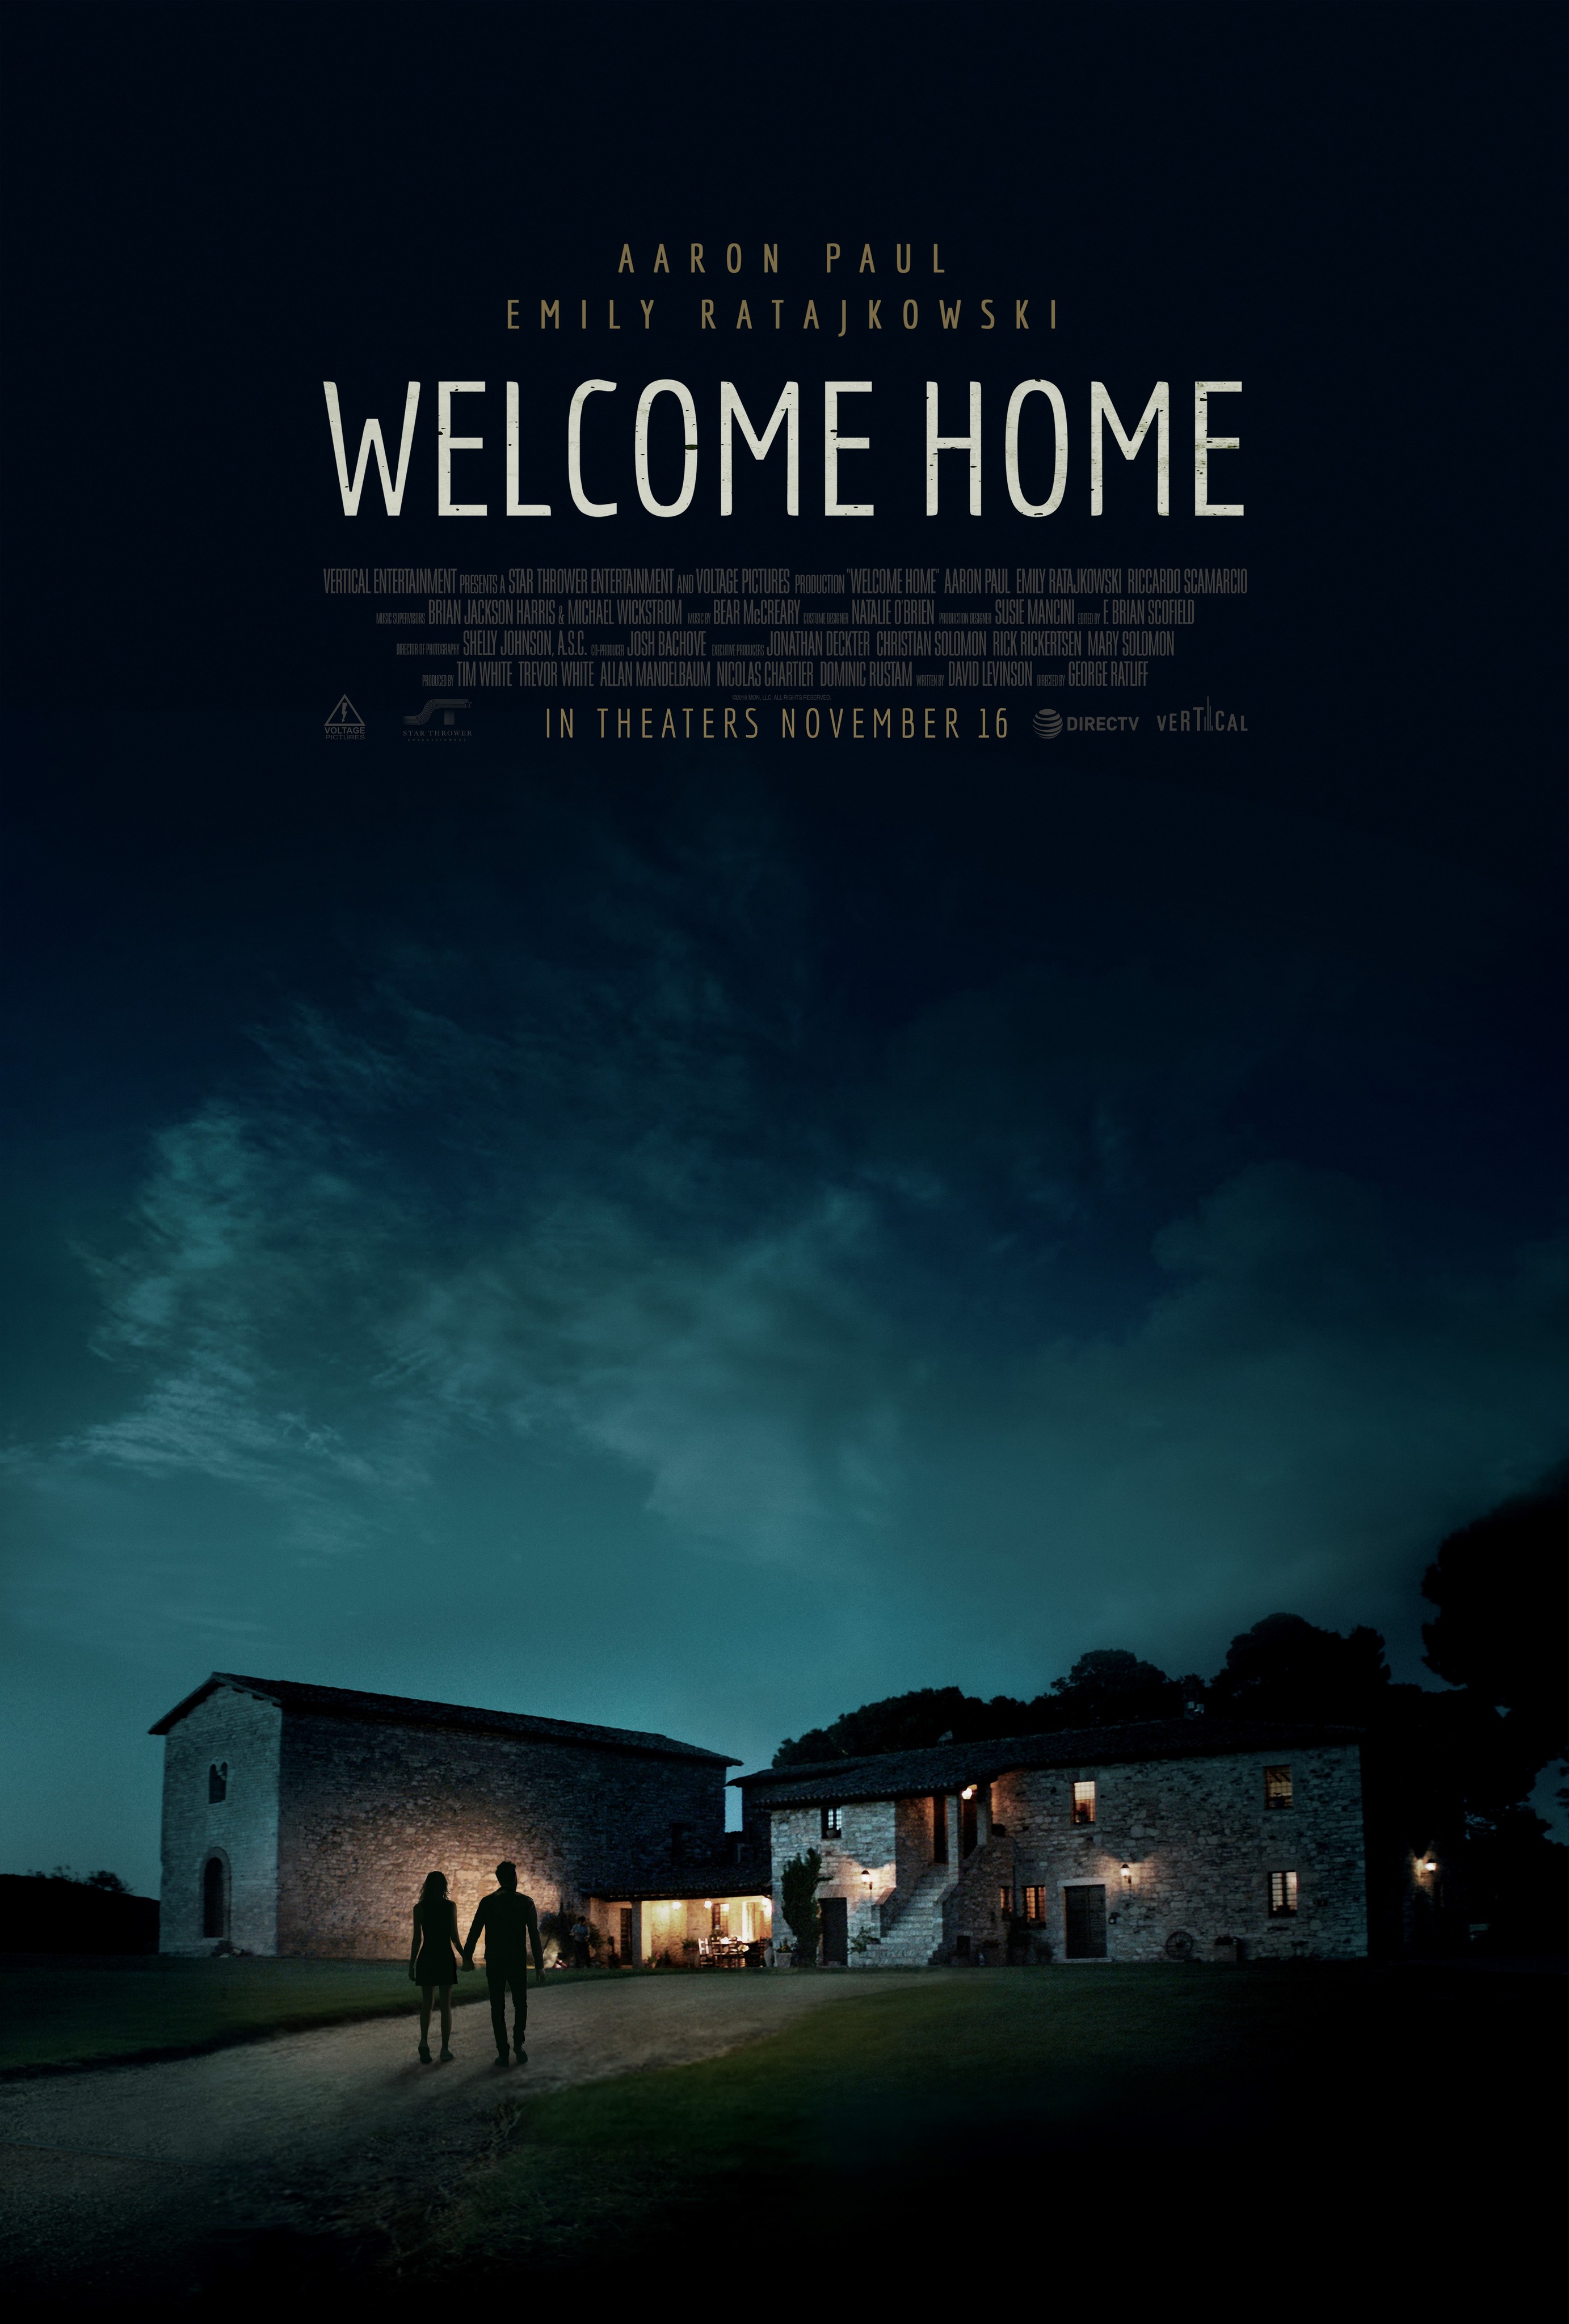 Home Trailer 1 Trailers & Videos Rotten Tomatoes